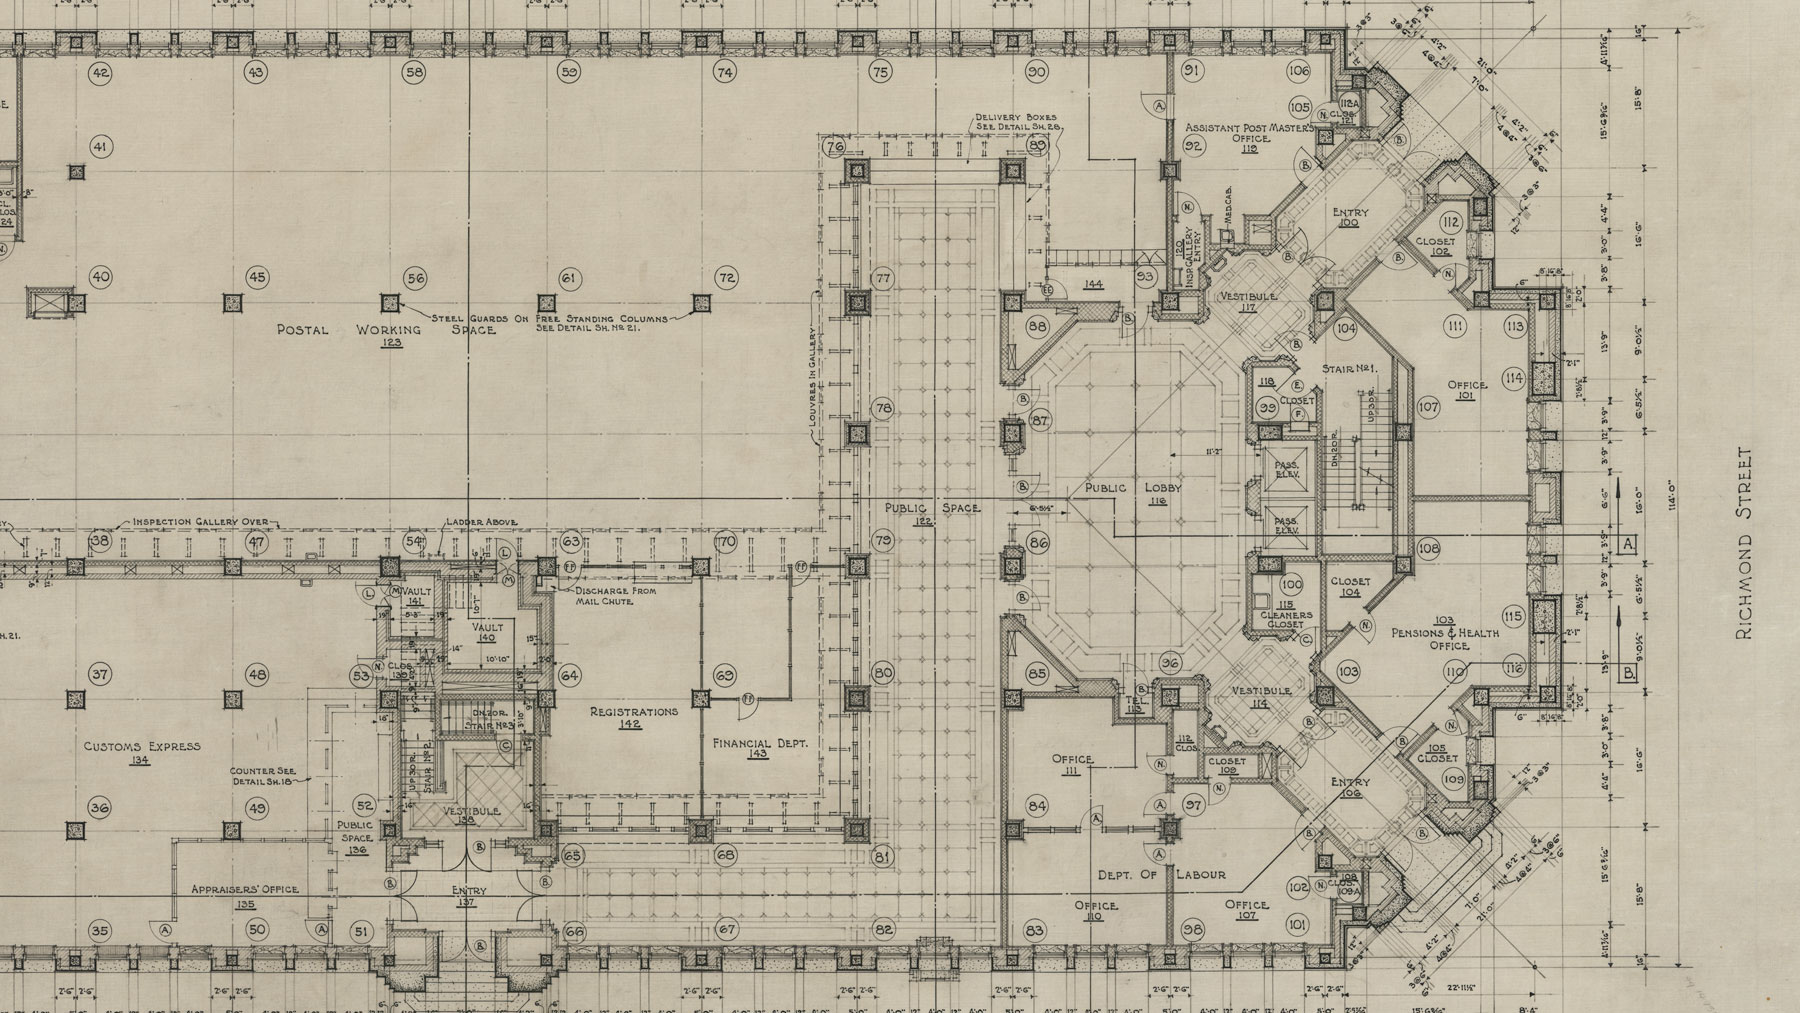 The Dominion Public Building: The Architectural Drawings - Plans and Sections